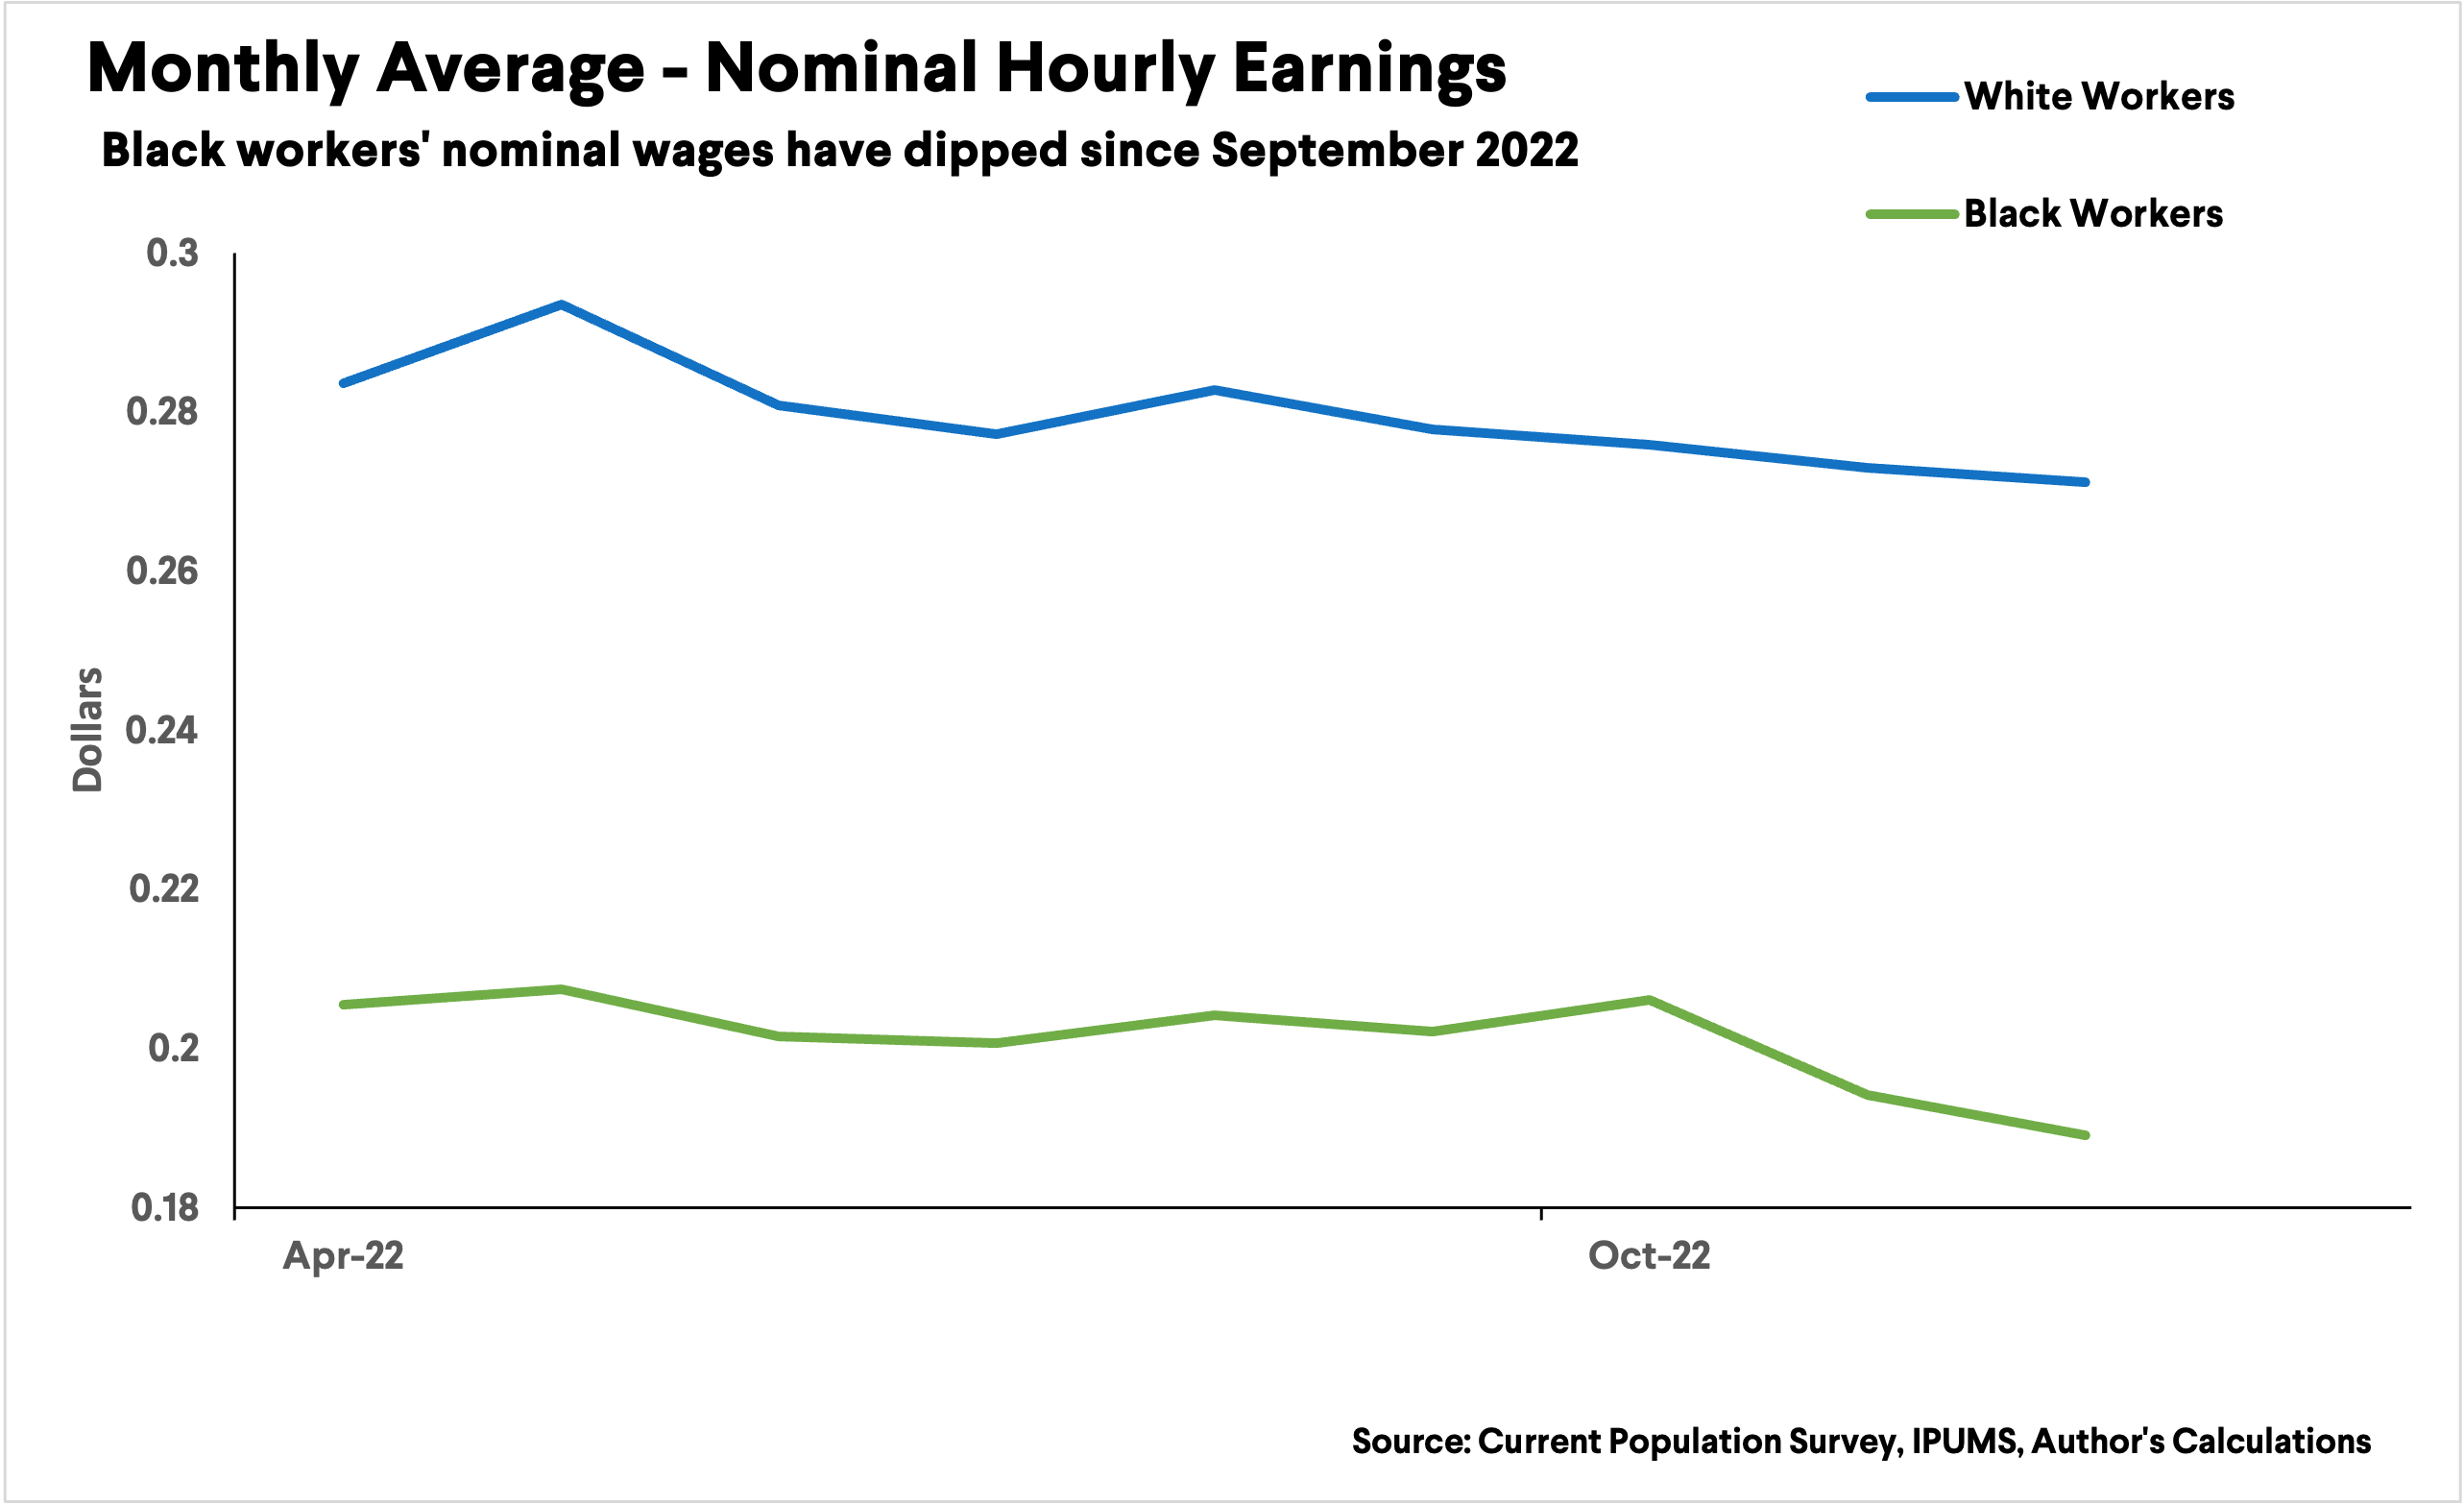 Monthly Average - Nominal Hourly Earnings